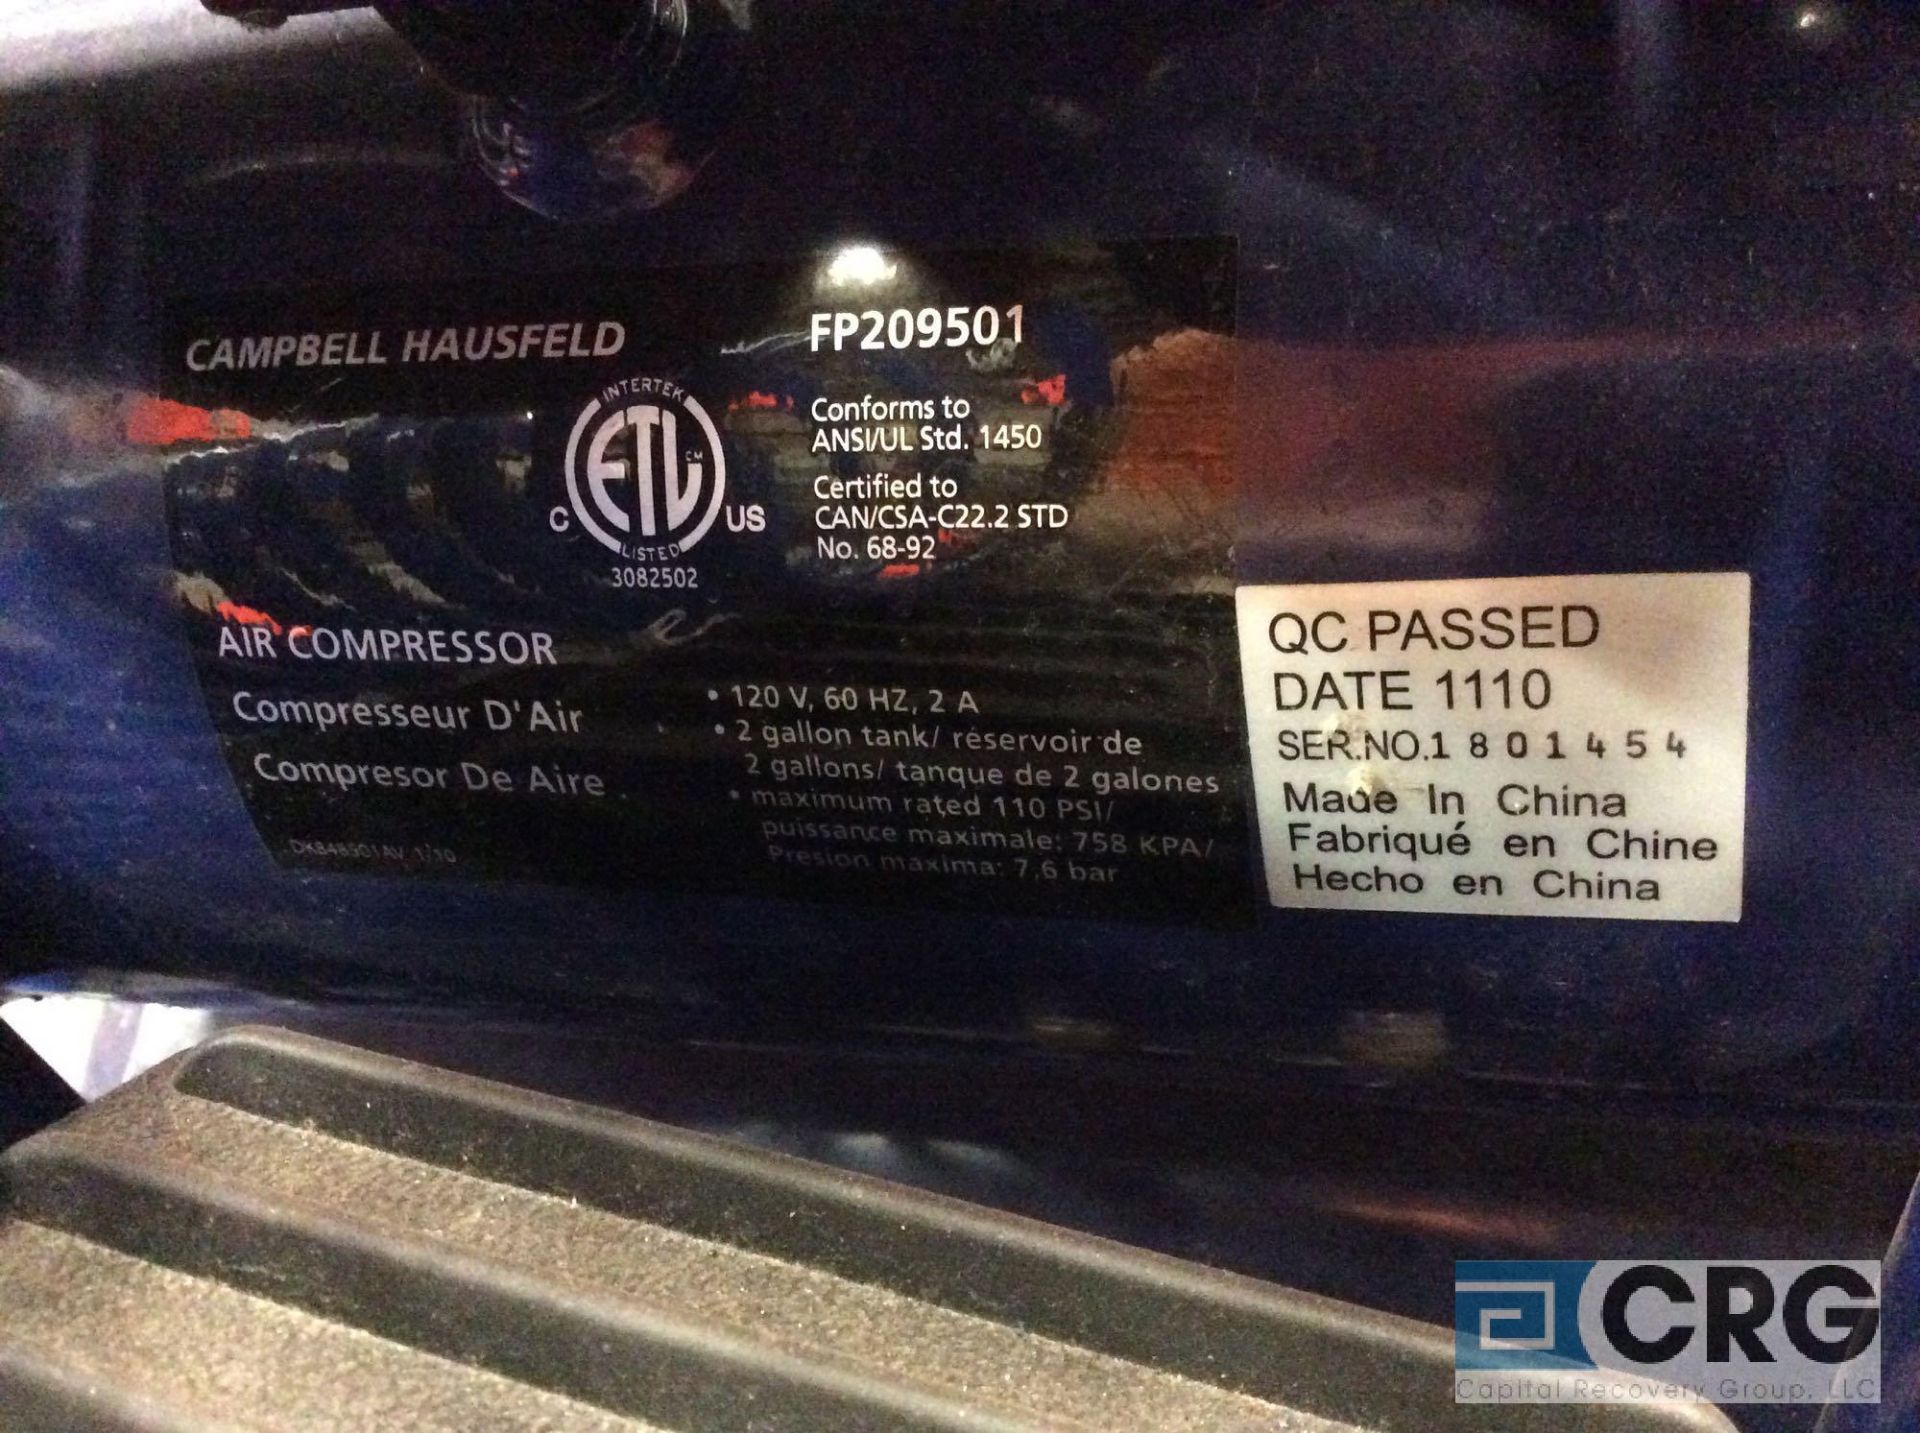 Campbell Hausfeld FP209501 portable inflation and fastening air compressor, 110 max psi, 1 phase - Image 3 of 3